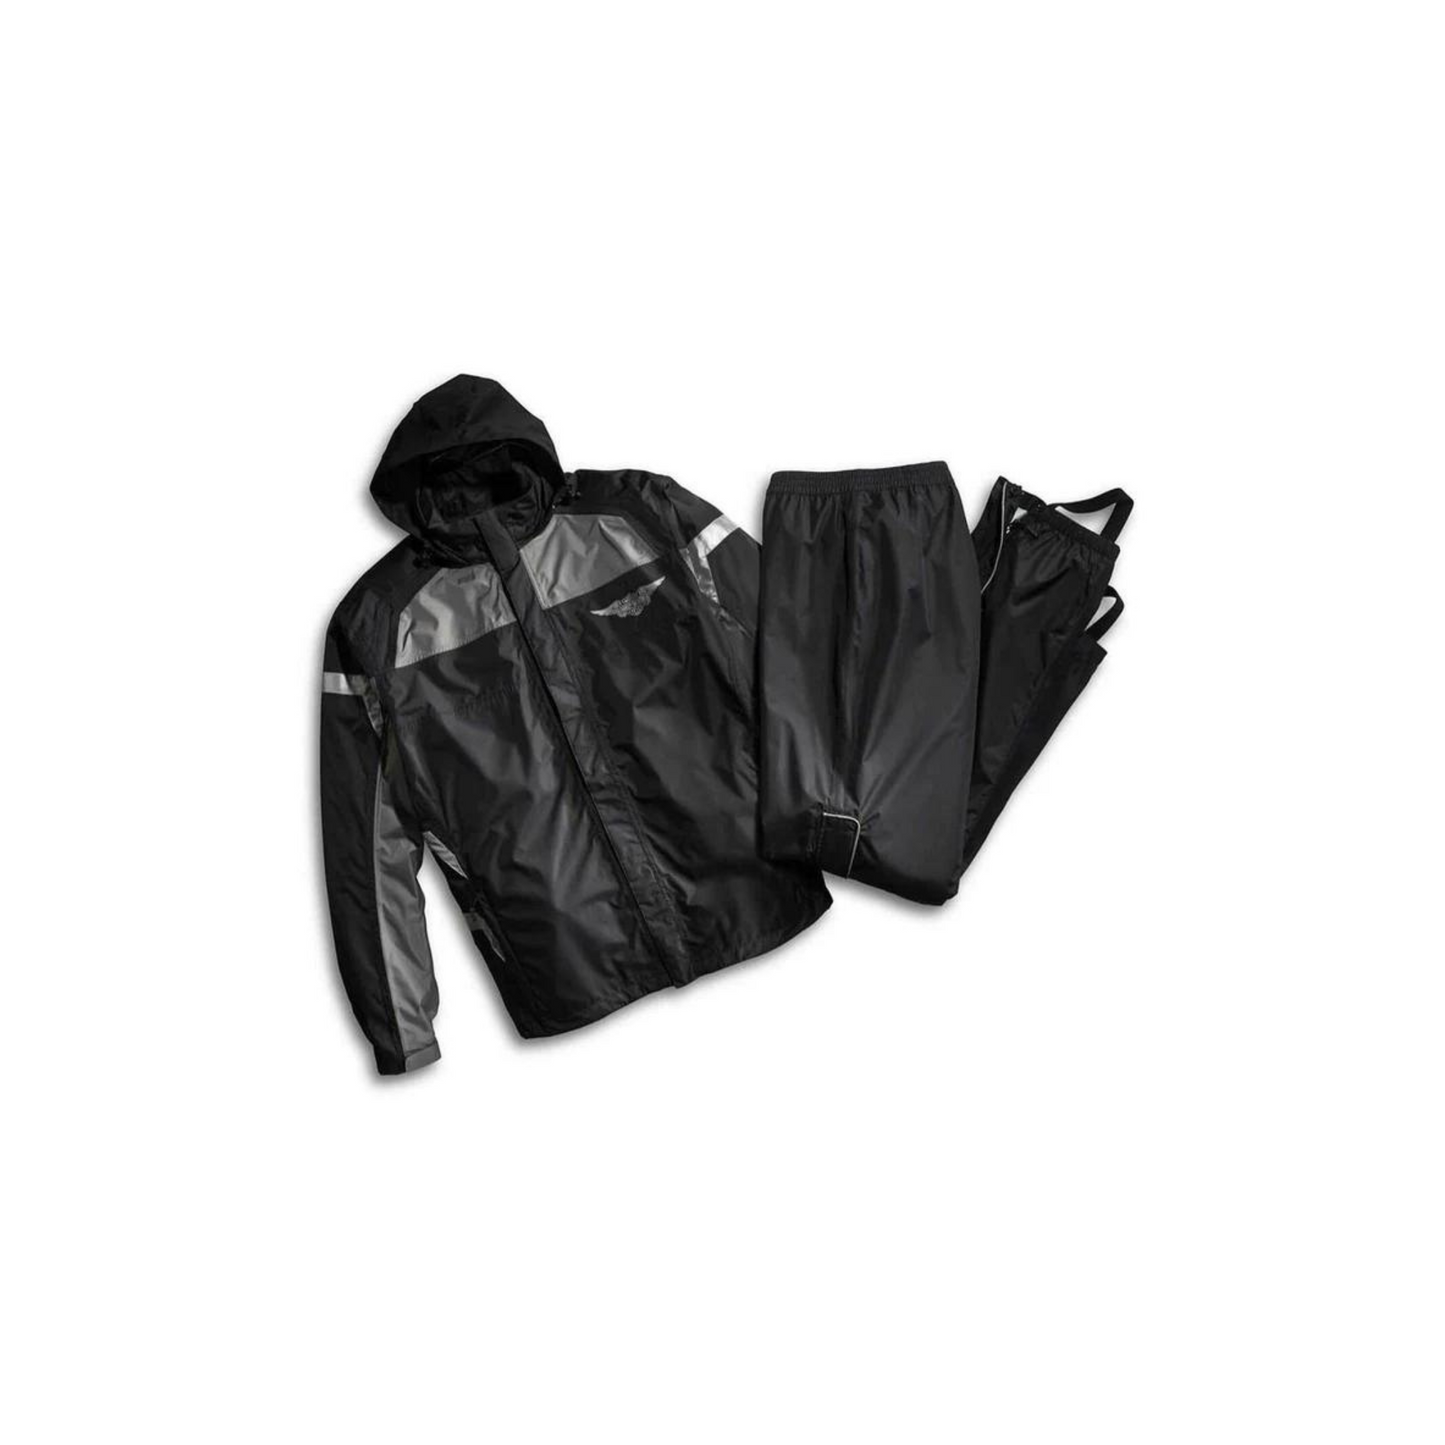 Harley-Davidson® Rain Suit, Full Speed Winged B&S Reflective Suit